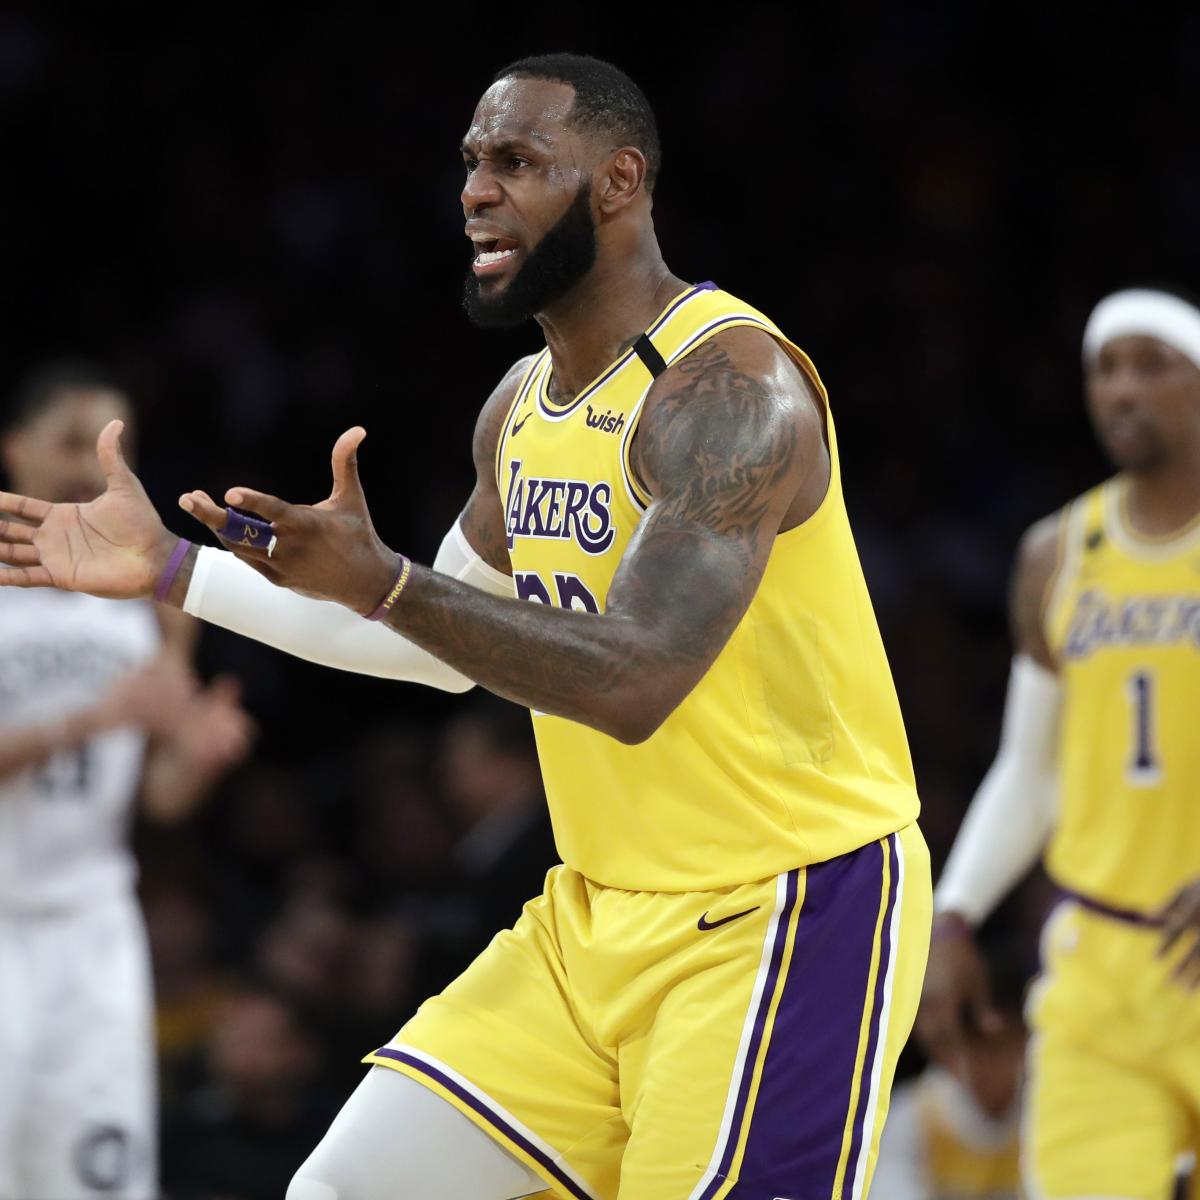 NBA Training Camps 2020: Start Dates, Schedules and Top Storylines in